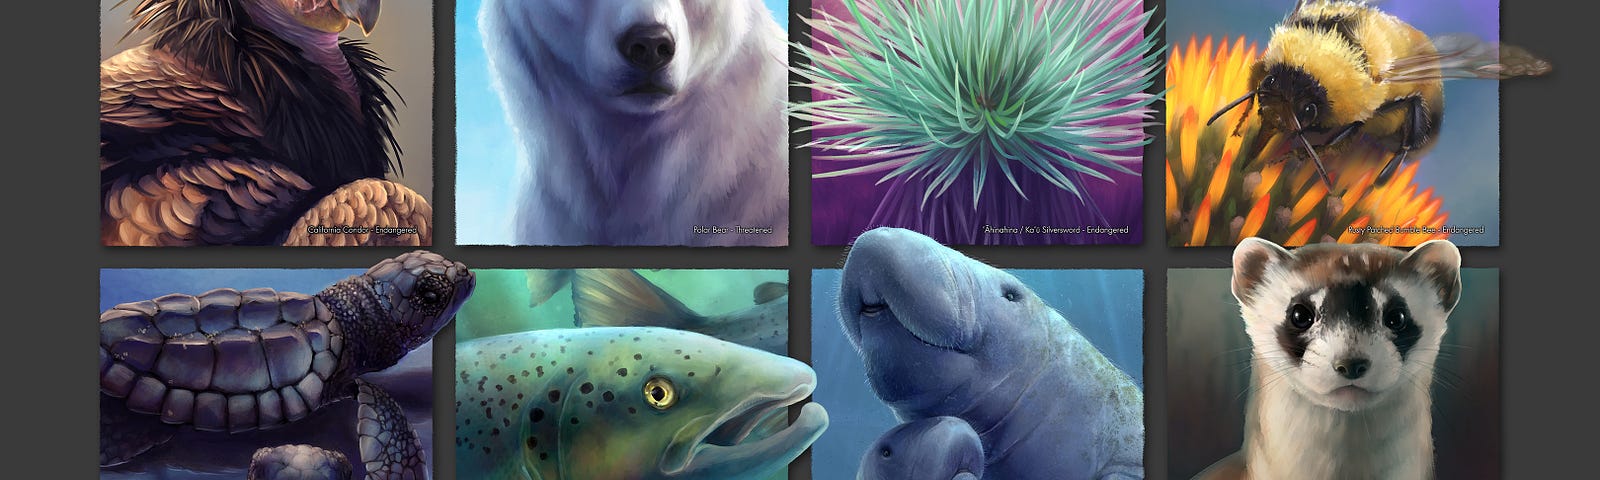 Eight digital illustrations are shown. Four on top and four underneath. Each illustration includes an animal or animals. Underneath the illustrations, white text reads, “The Endangered Species Act at 50. More Important Than Ever.” The U.S. Fish & Wildlife Service logo is at bottom right. Everything is shown over a dark gray background.